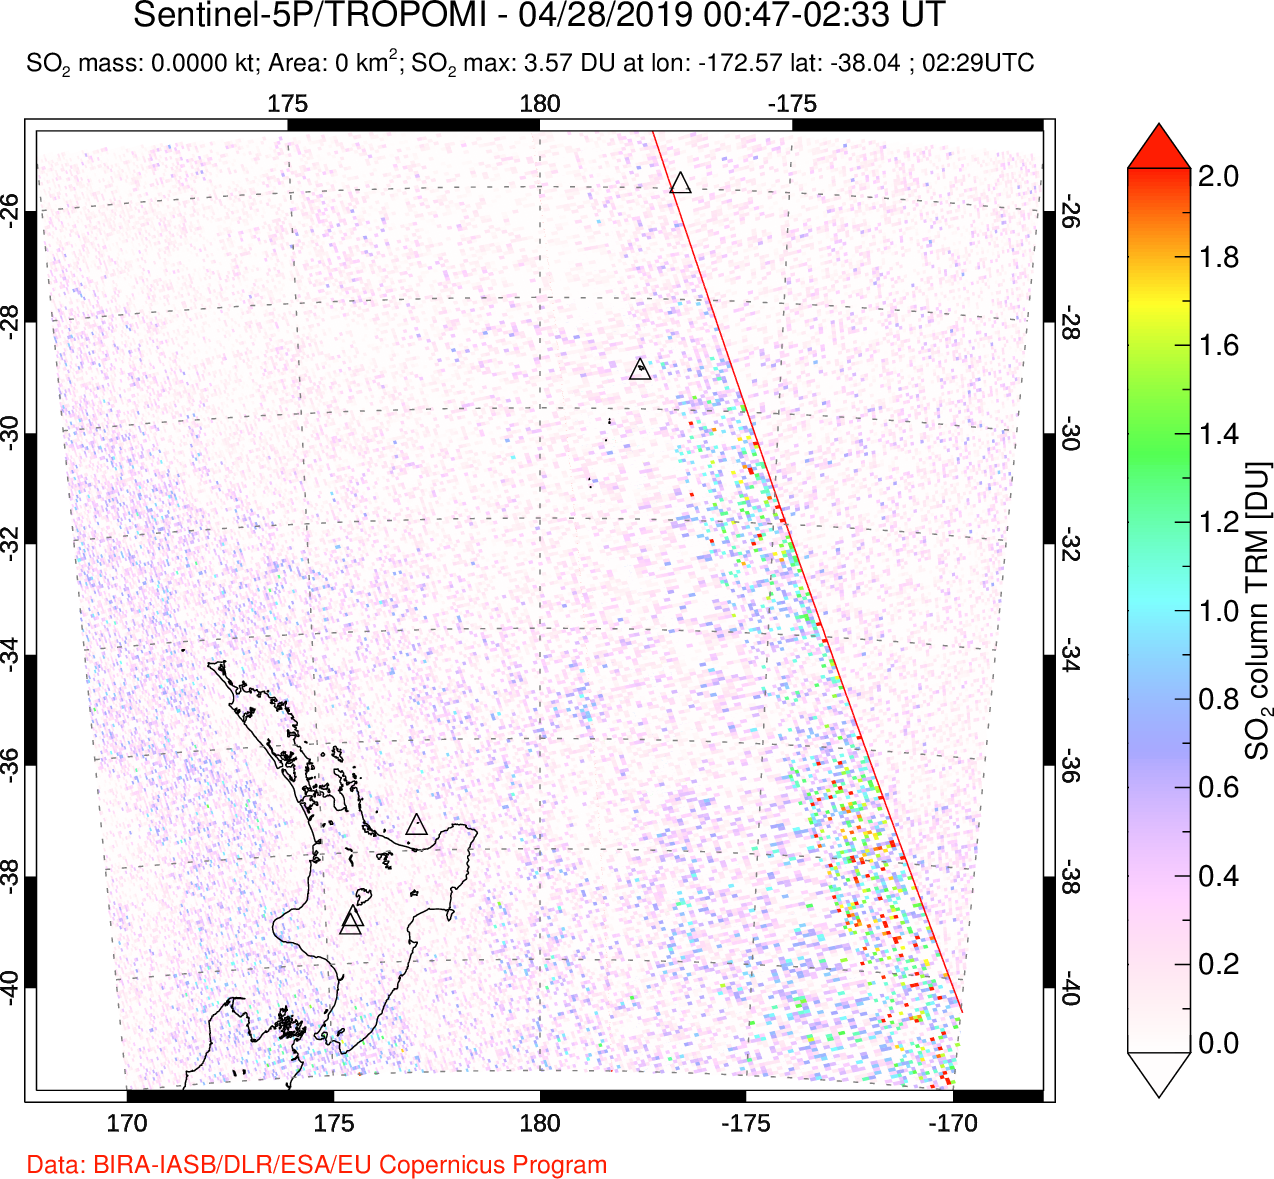 A sulfur dioxide image over New Zealand on Apr 28, 2019.